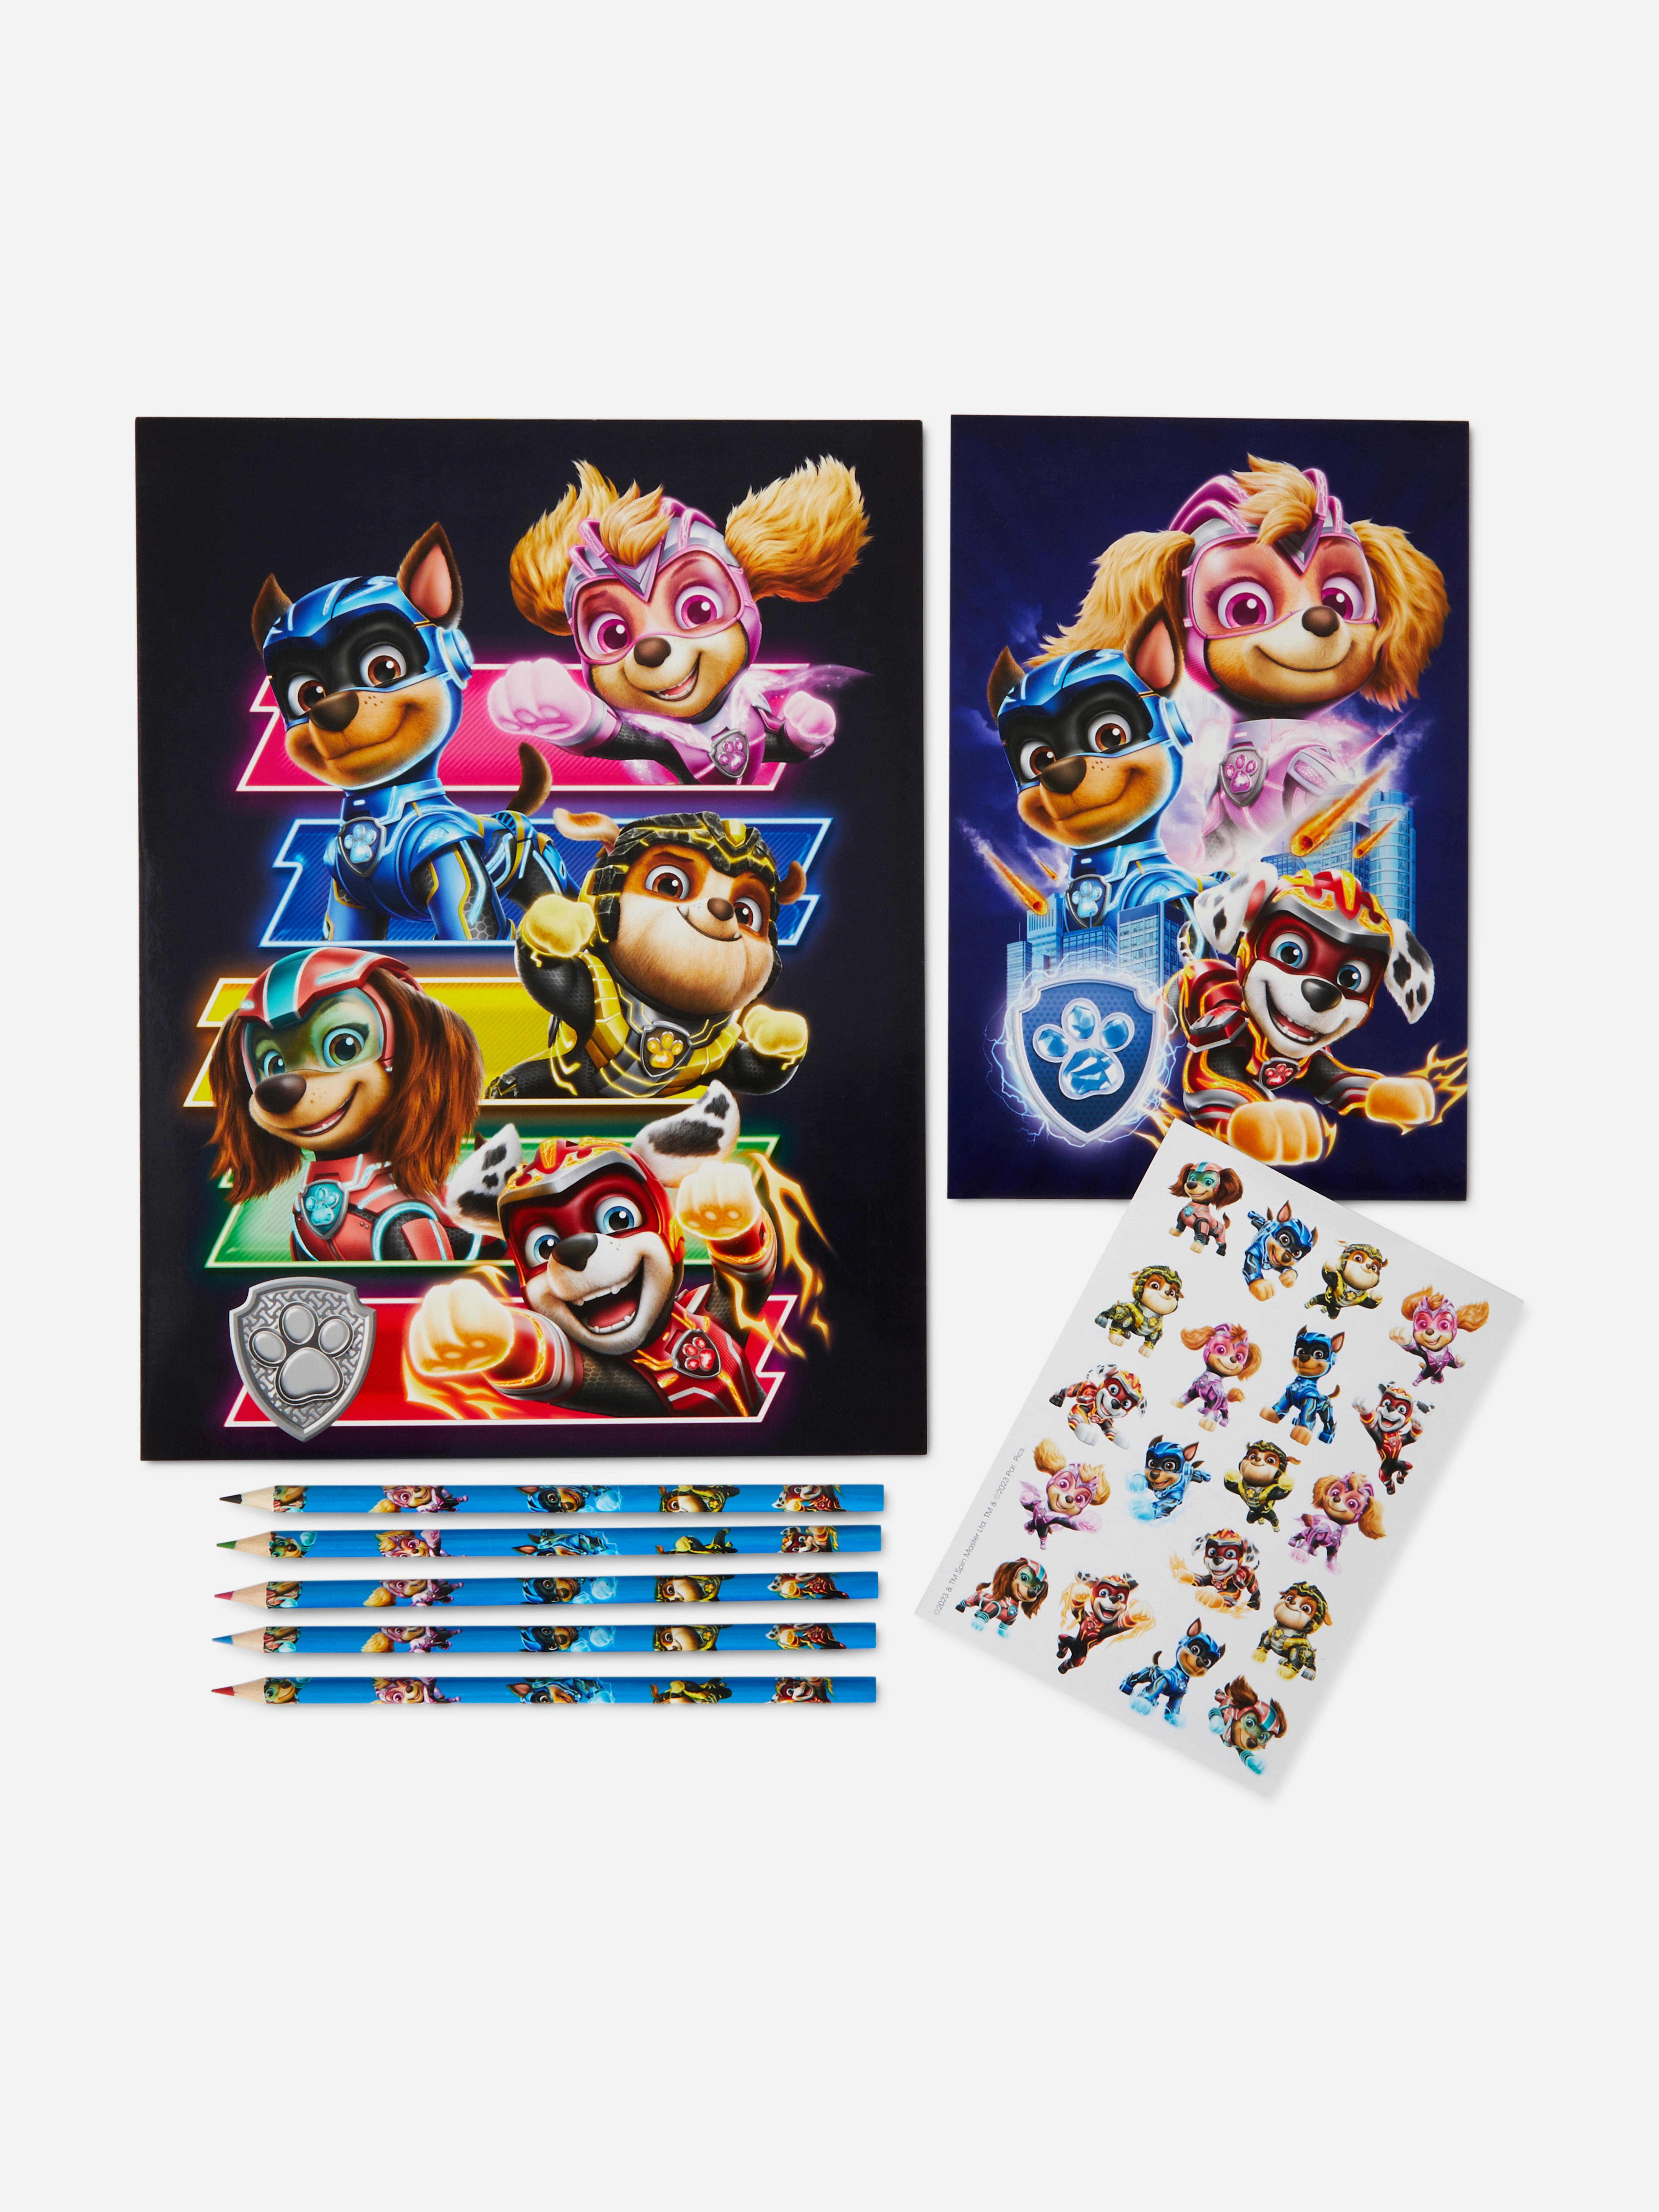 PAW Patrol Colouring Play Pack